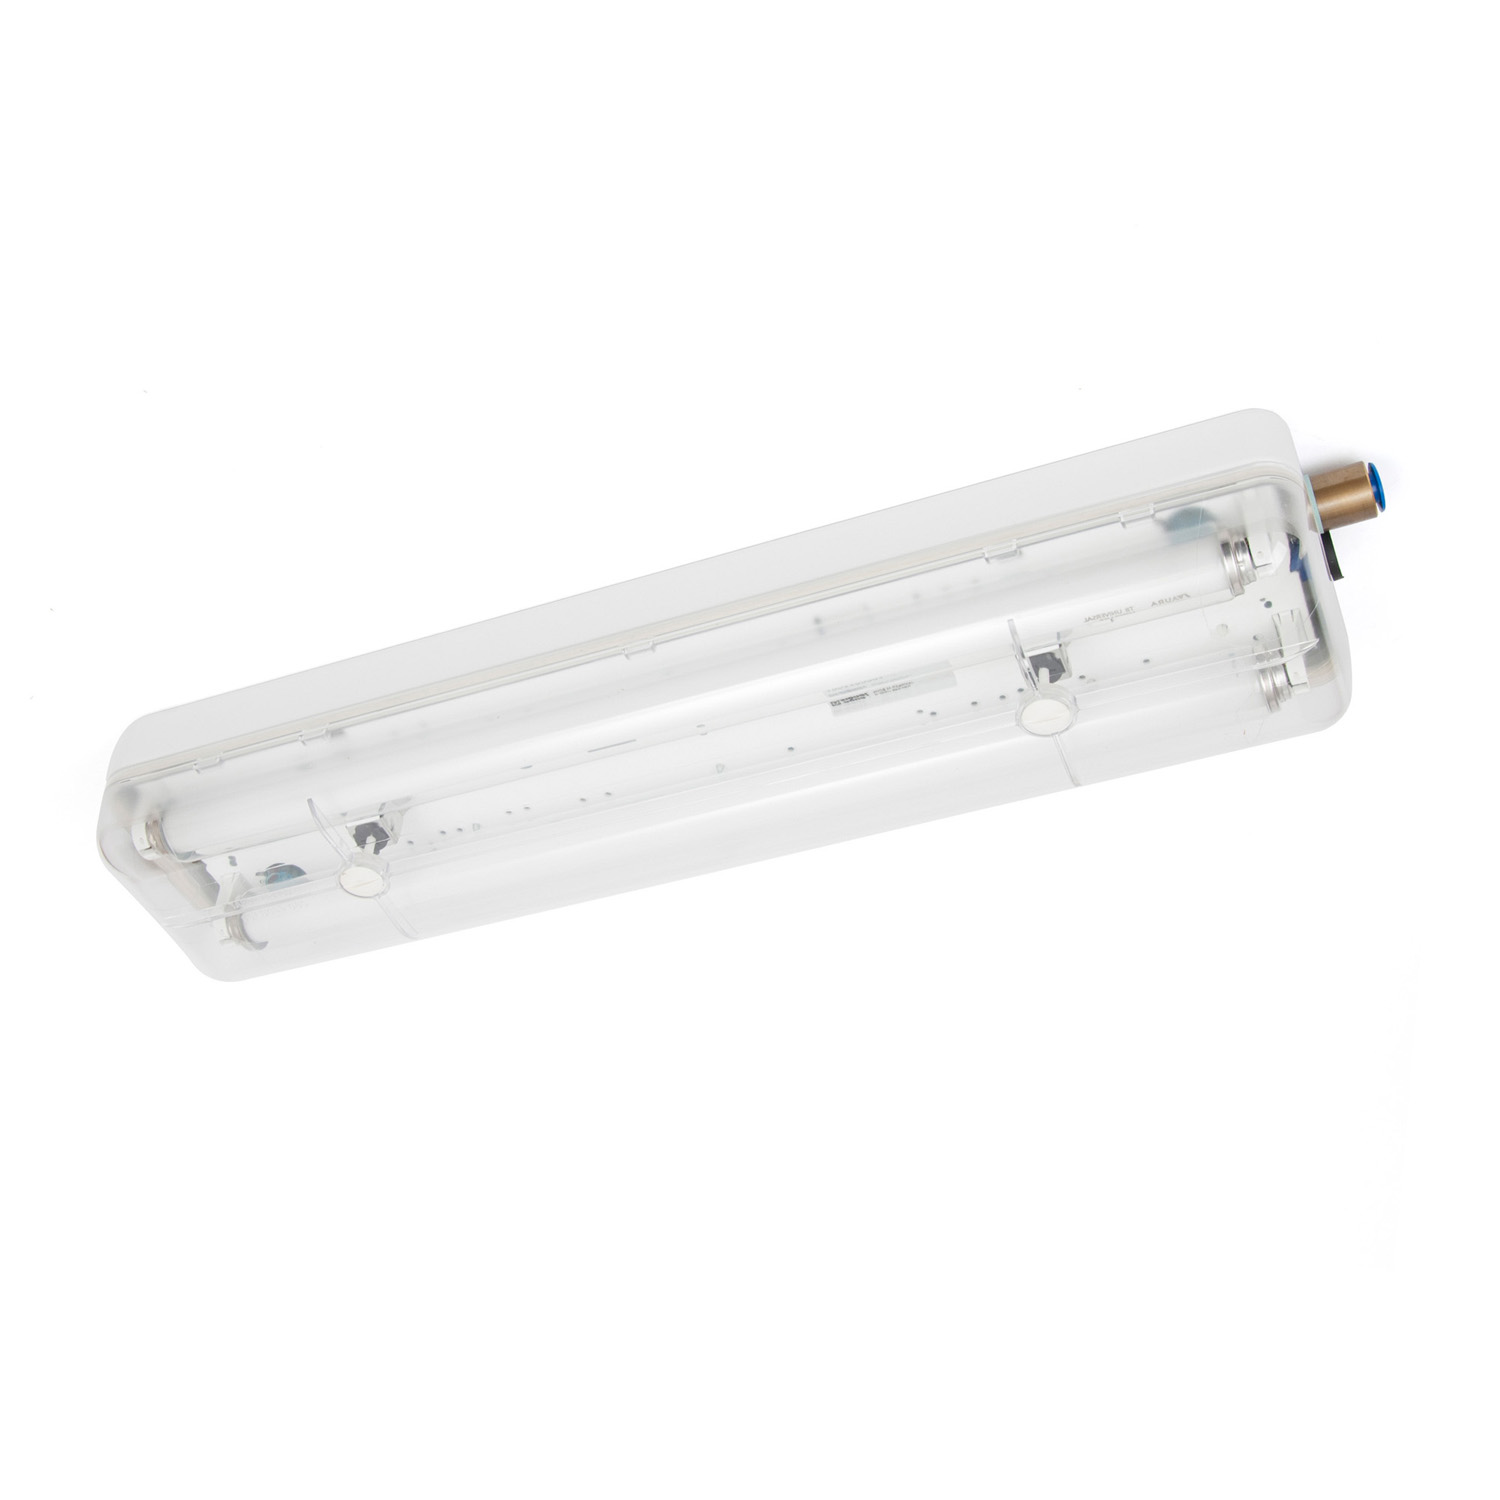 1891104201 Coldroom luminaire surface, 2X18W 230V 60Hz, IP67, incl.thermo tubes